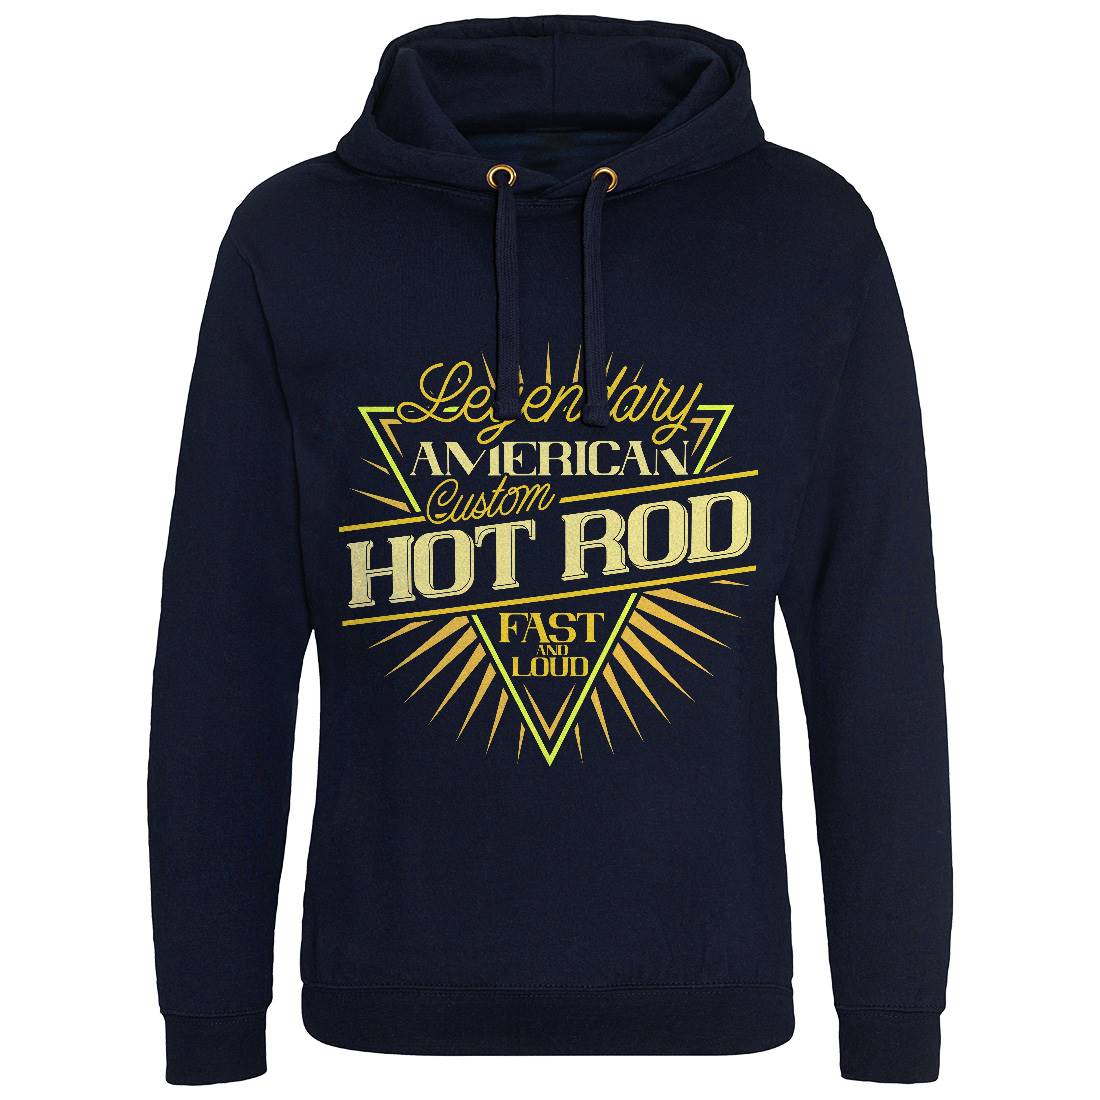 Hot Rod Mens Hoodie Without Pocket Cars B305